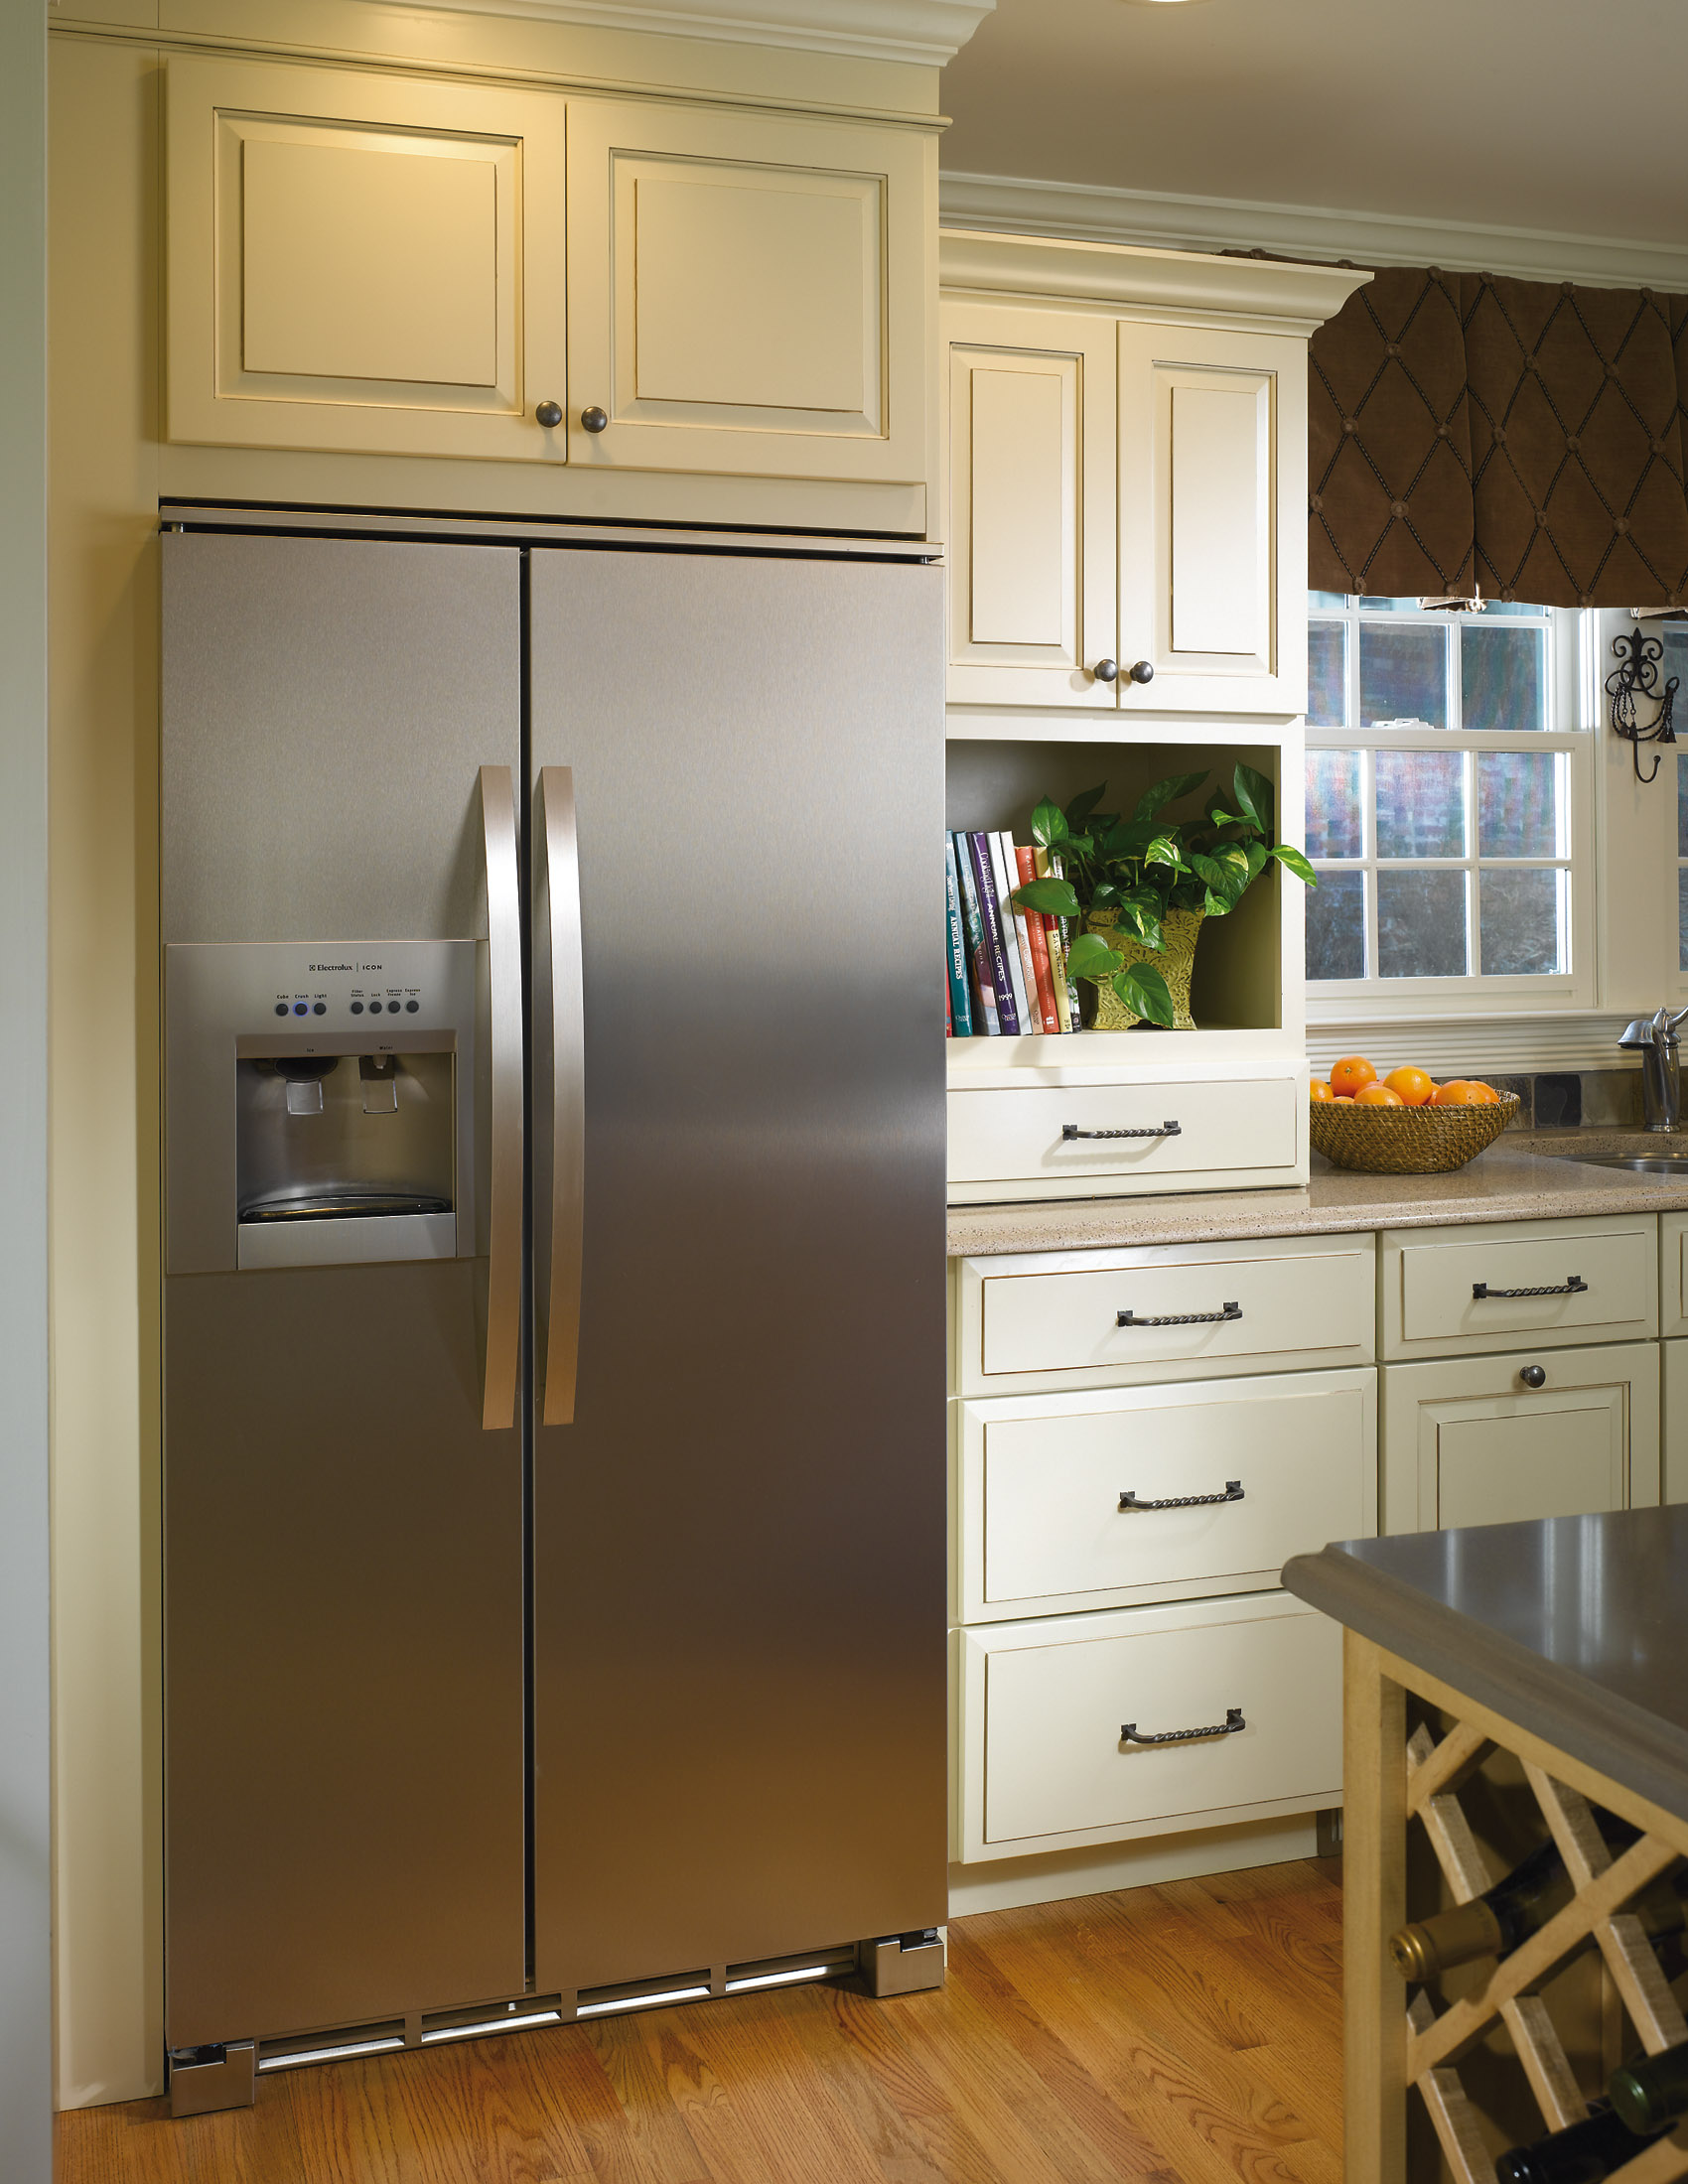 tips-to-consider-for-refrigerator-shopping-friedman-s-ideas-and